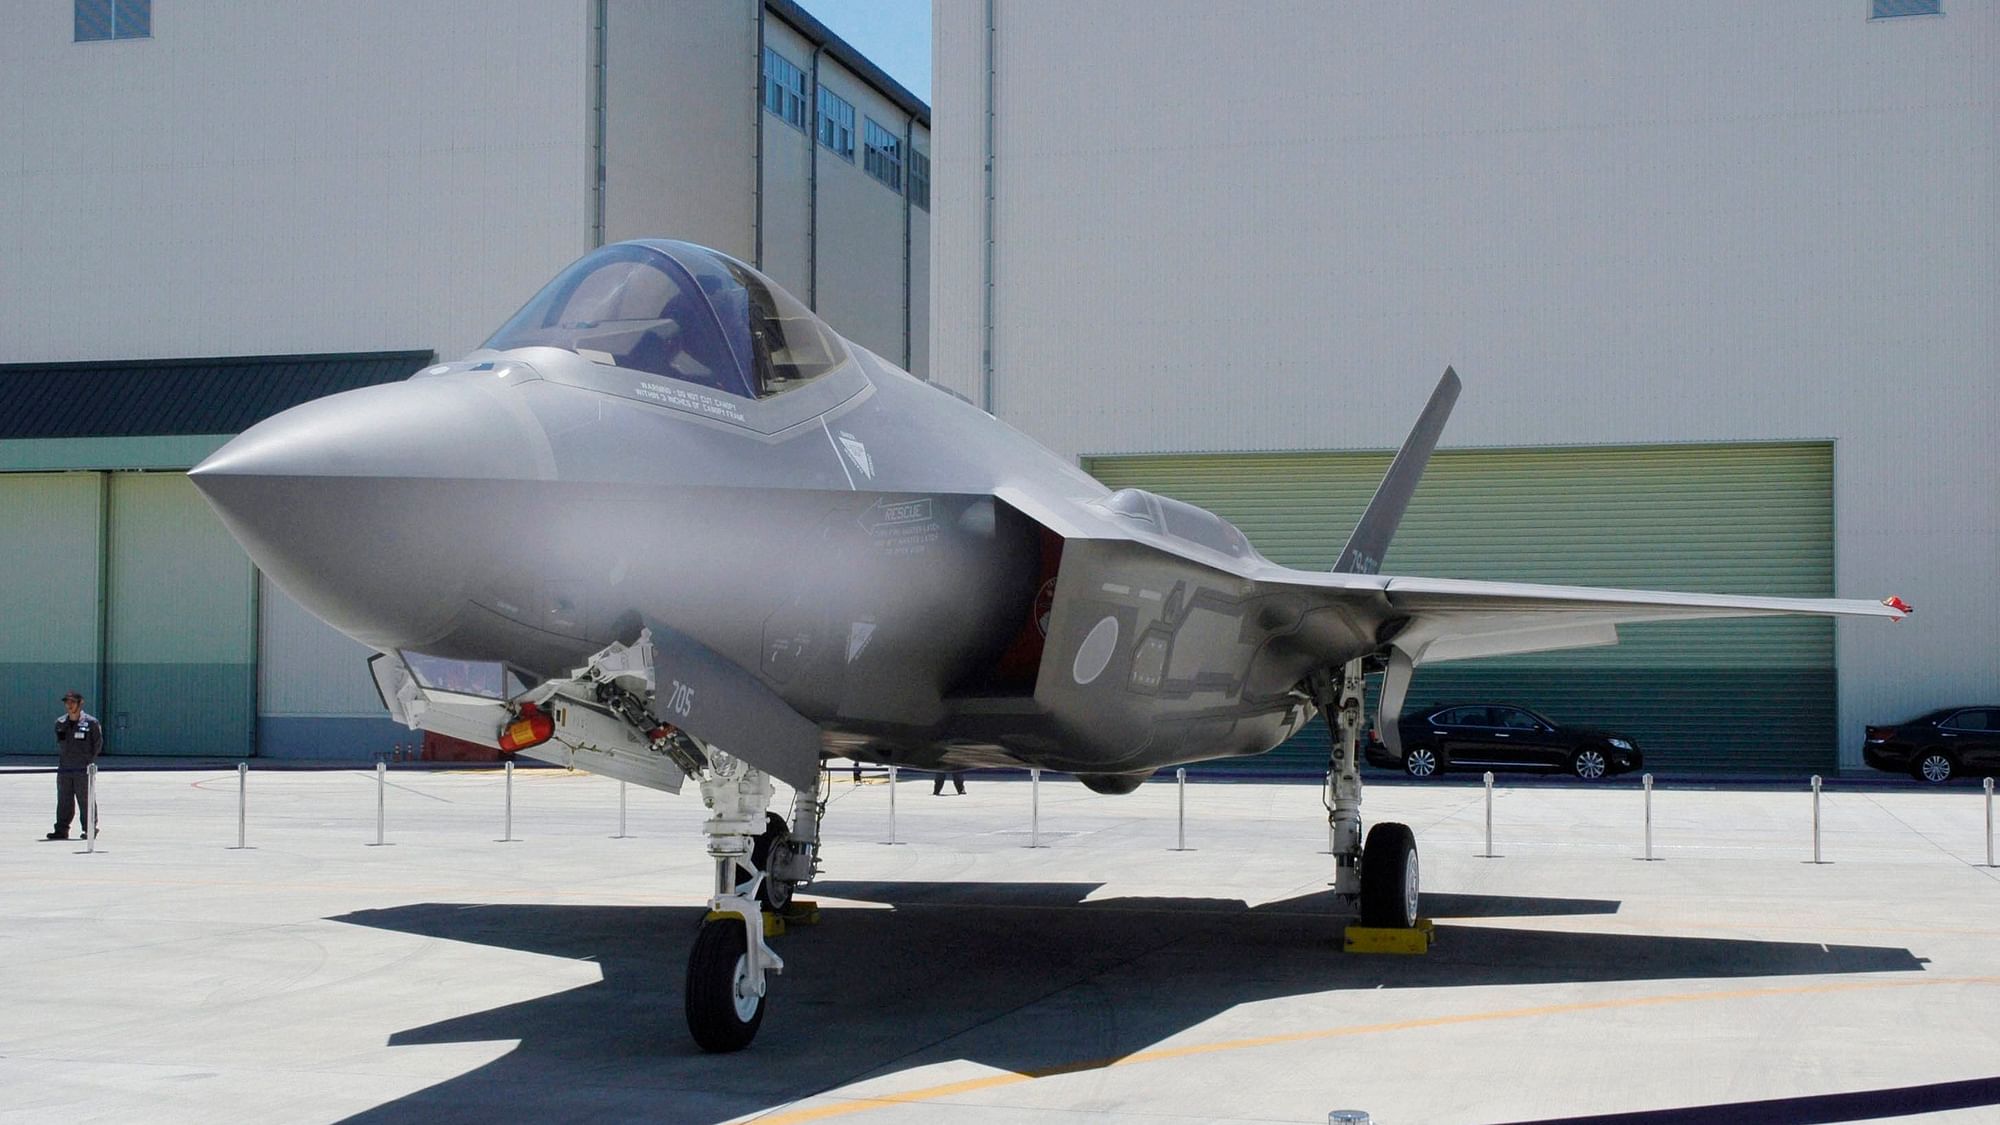 This June 2017  photo shows Japan Air Self-Defense Forces F-35A stealth jet at a factory of Mitsubishi Heavy Industries, in Toyoyama, central Japan. A search was underway for the Japanese fighter jet Tuesday, 9 April 2019, after it disappeared from radar during a flight exercise in northern Japan, defense officials said.